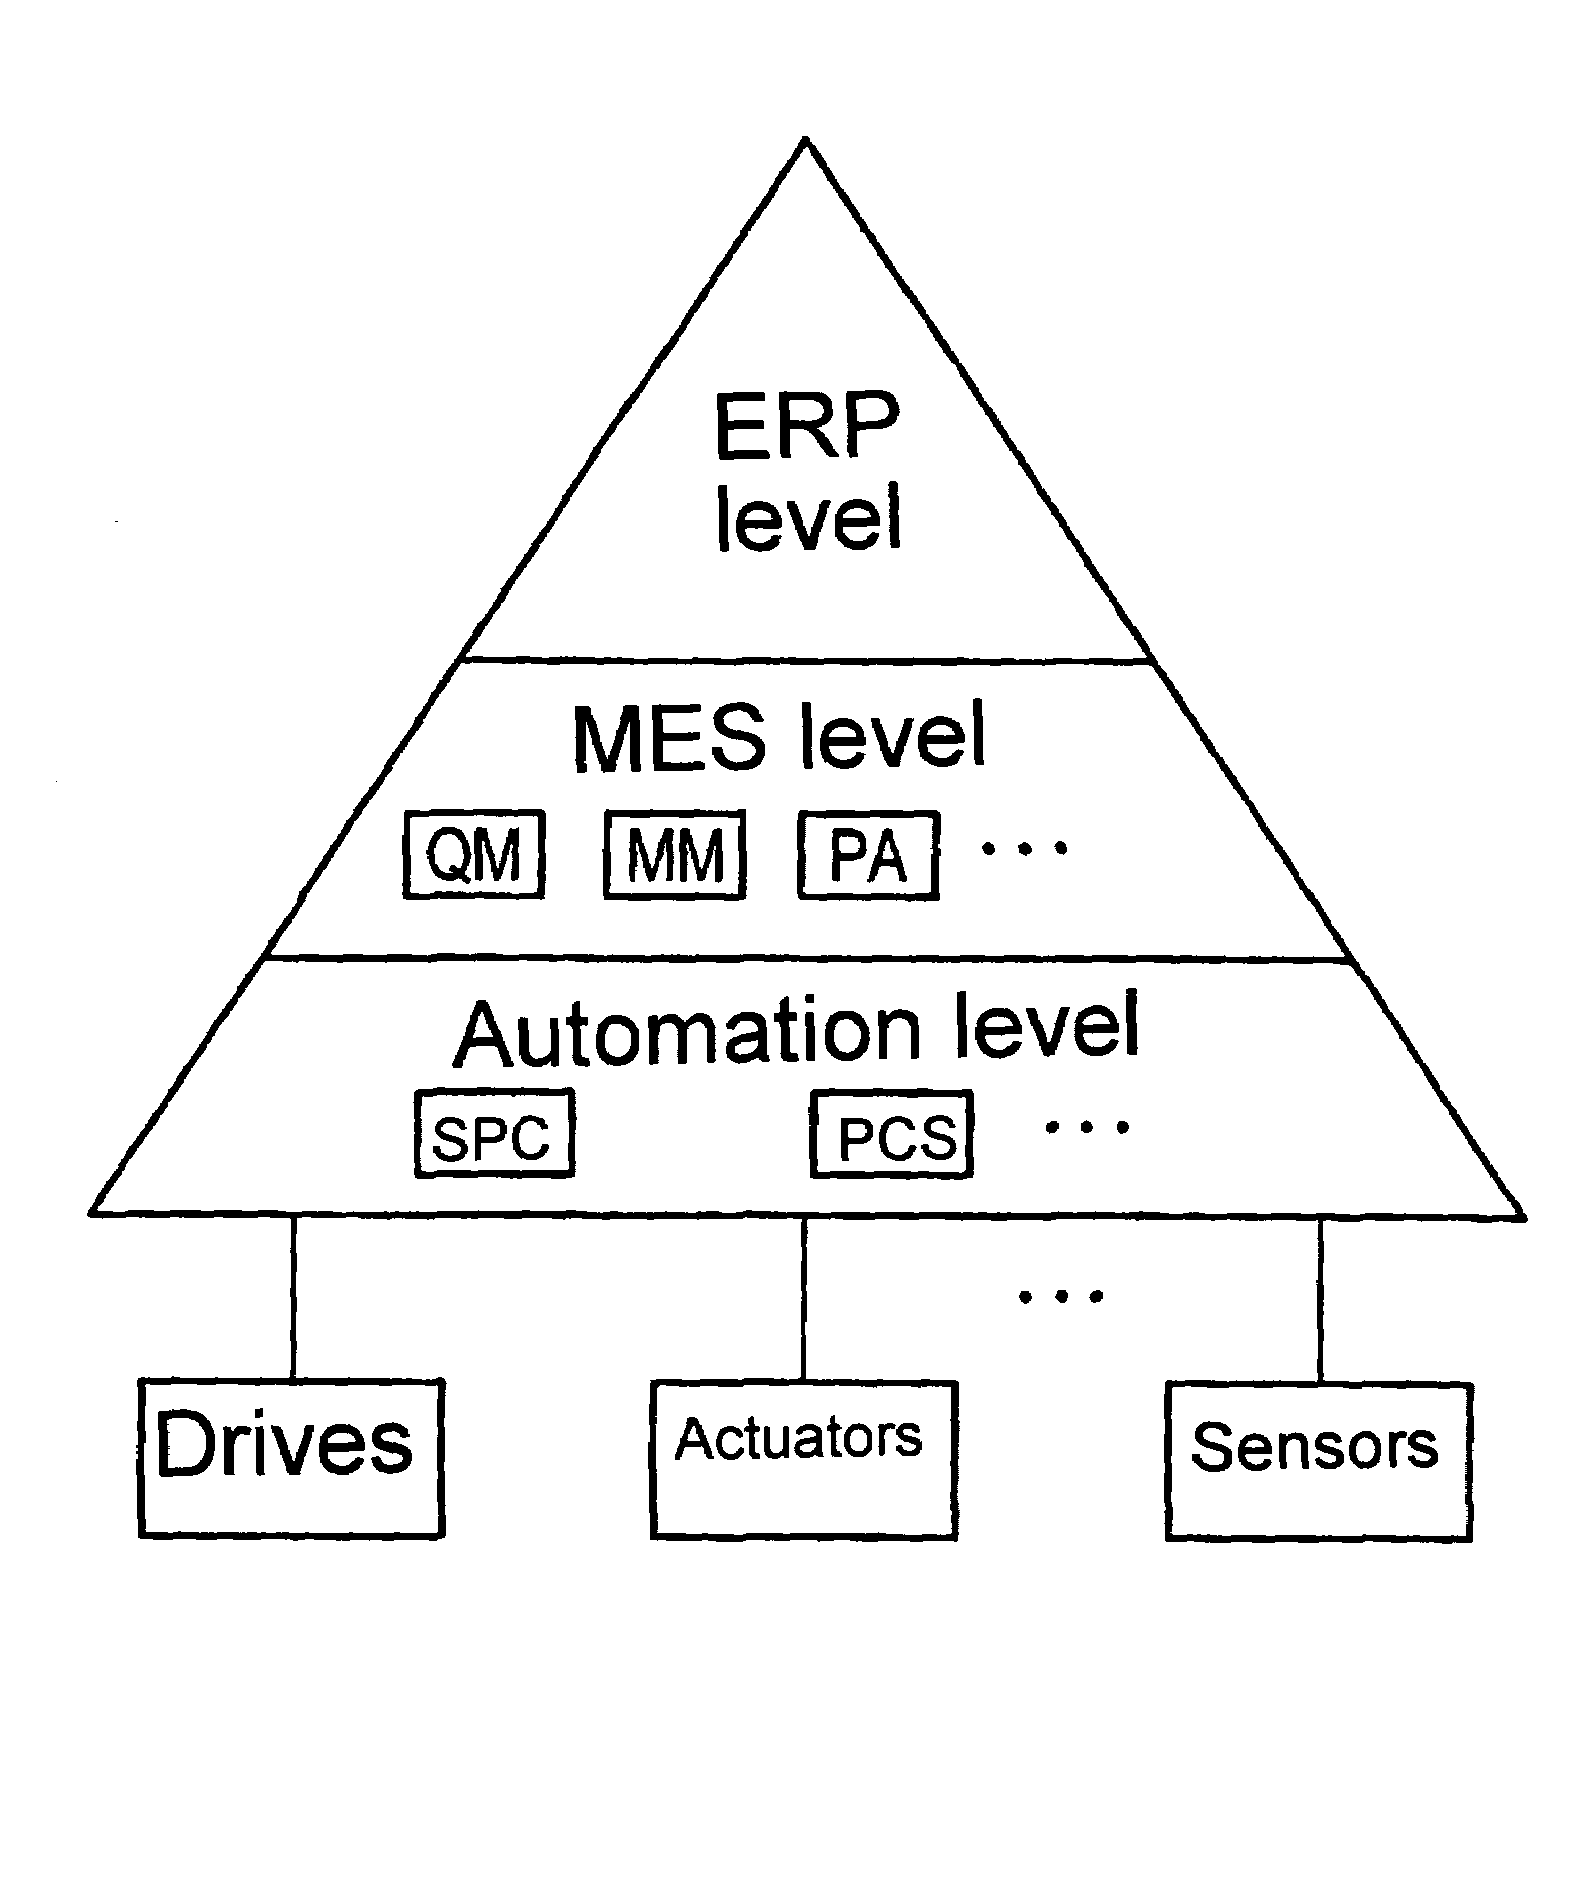 System and method for communicating between software applications, particularly MES (manufacturing execution system) applications